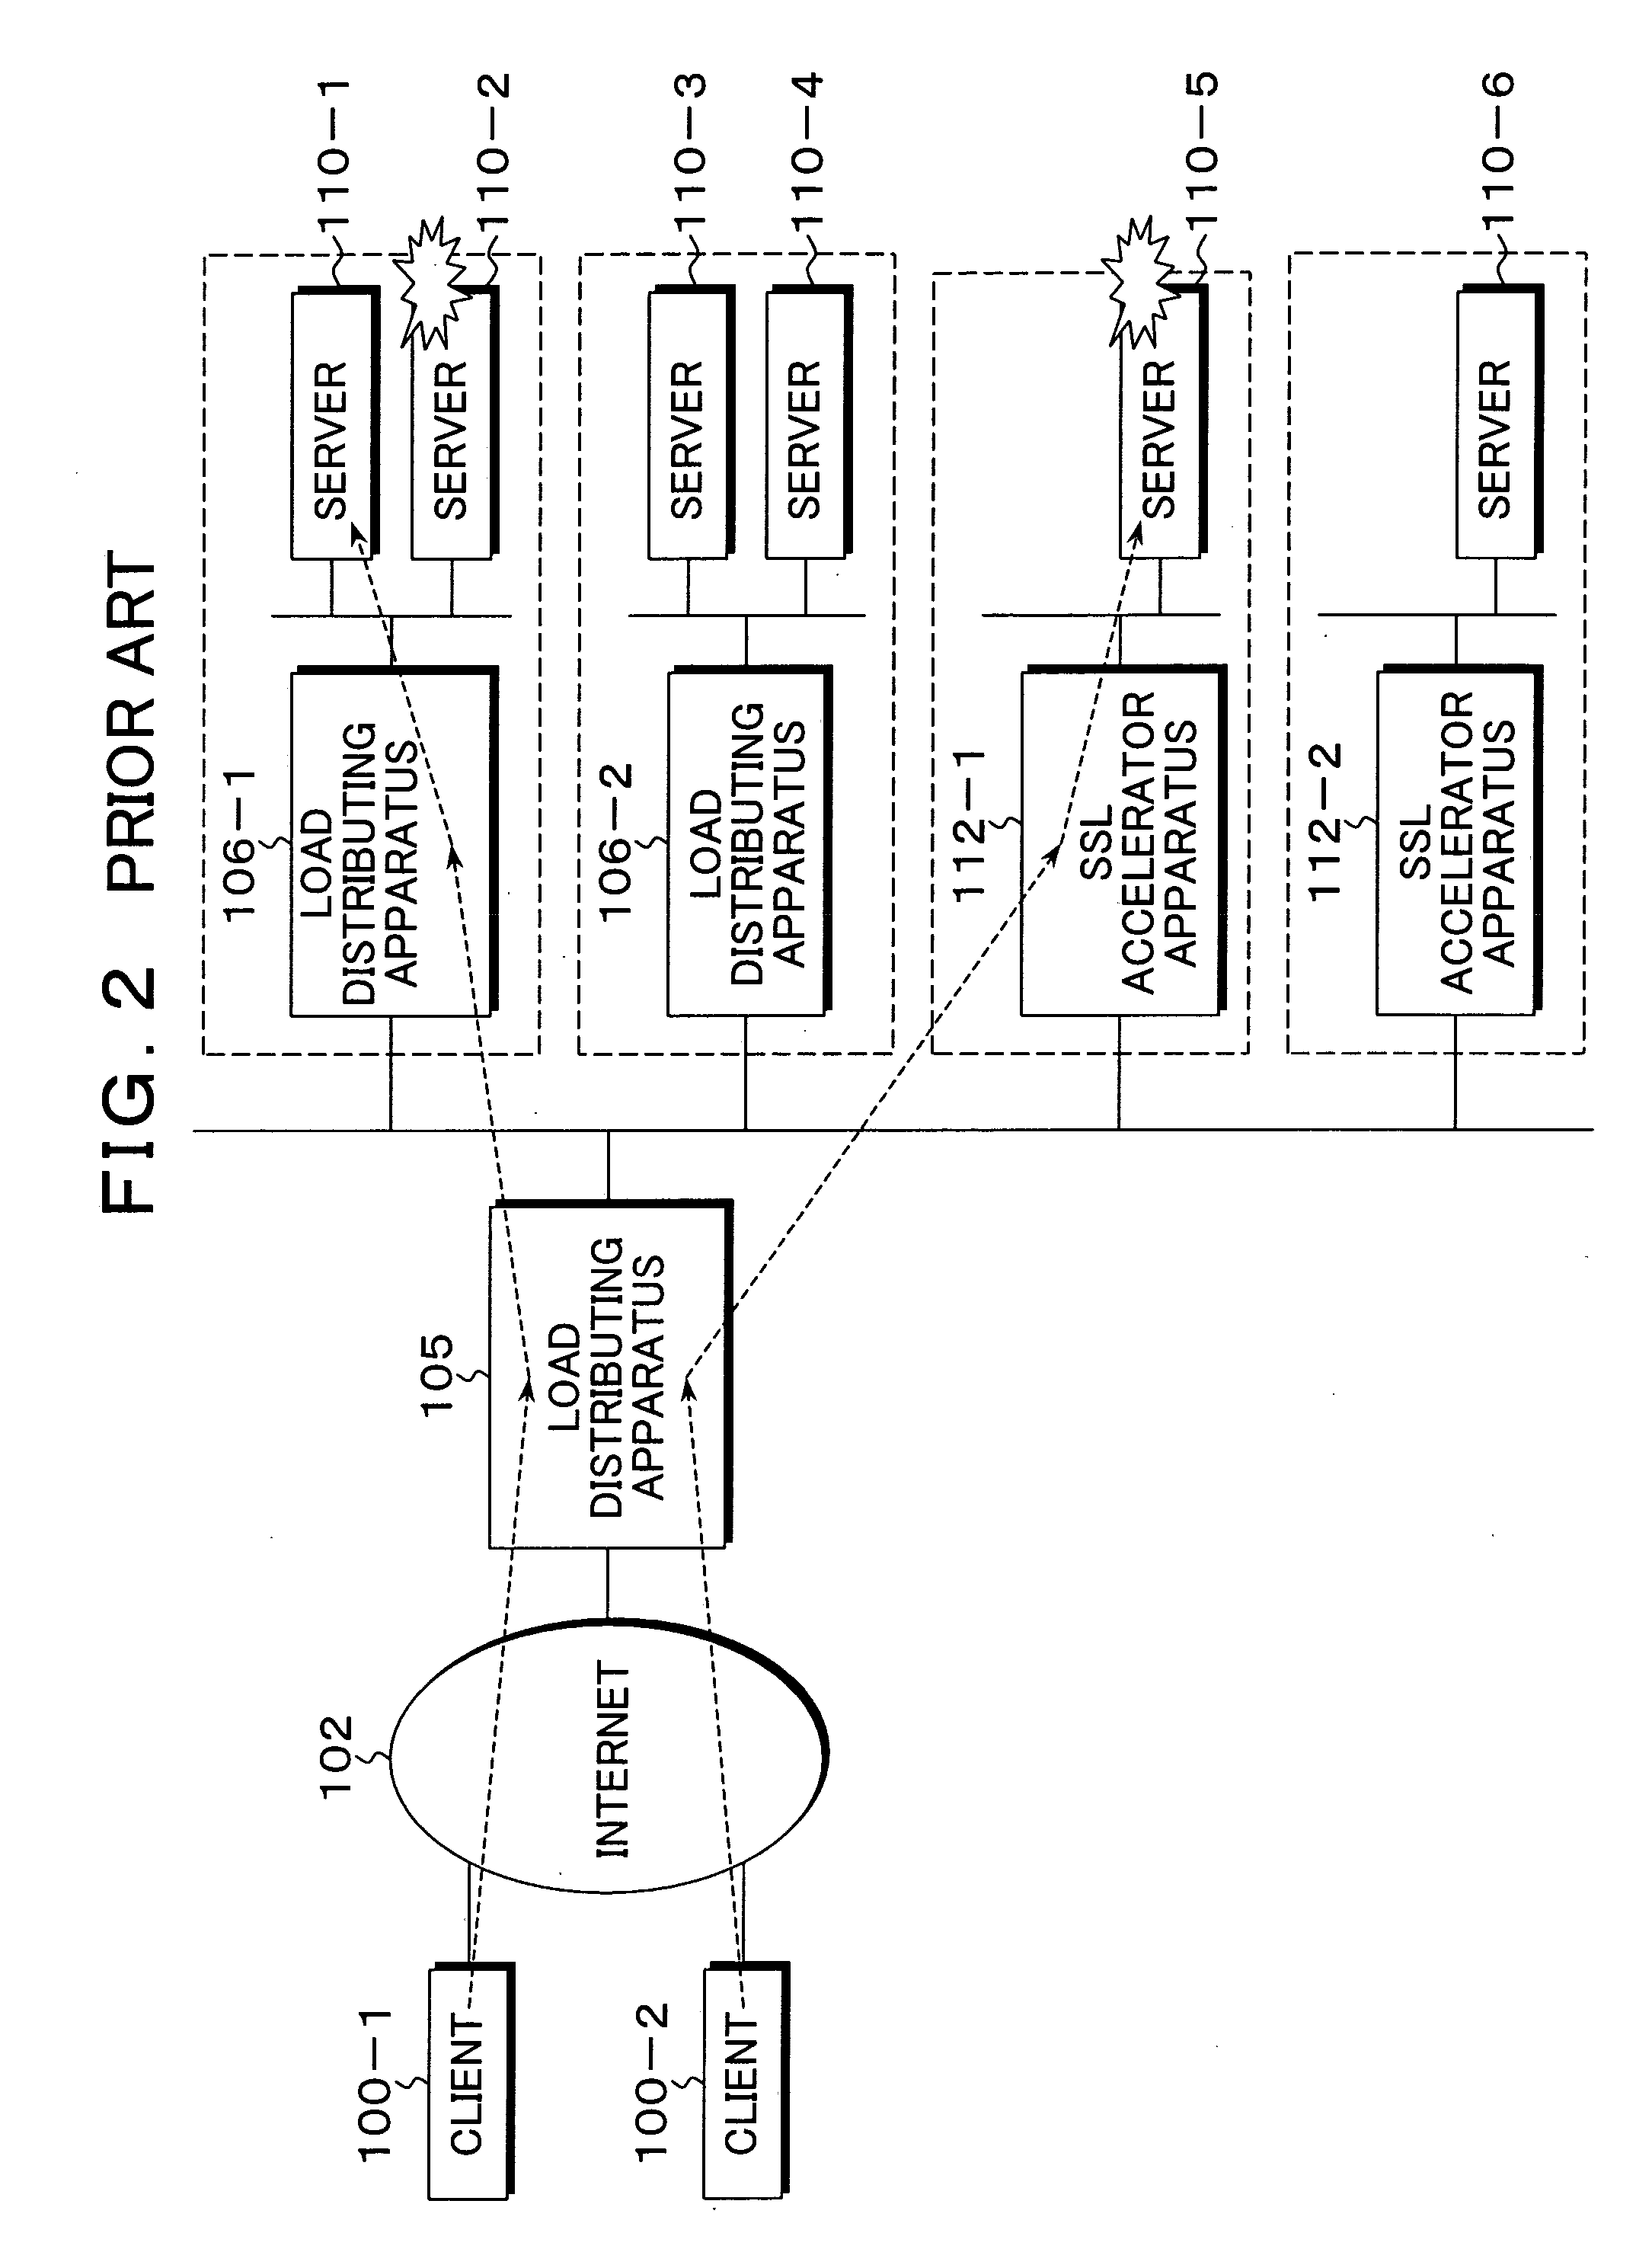 Multi-stage load distributing apparatus and method, and program